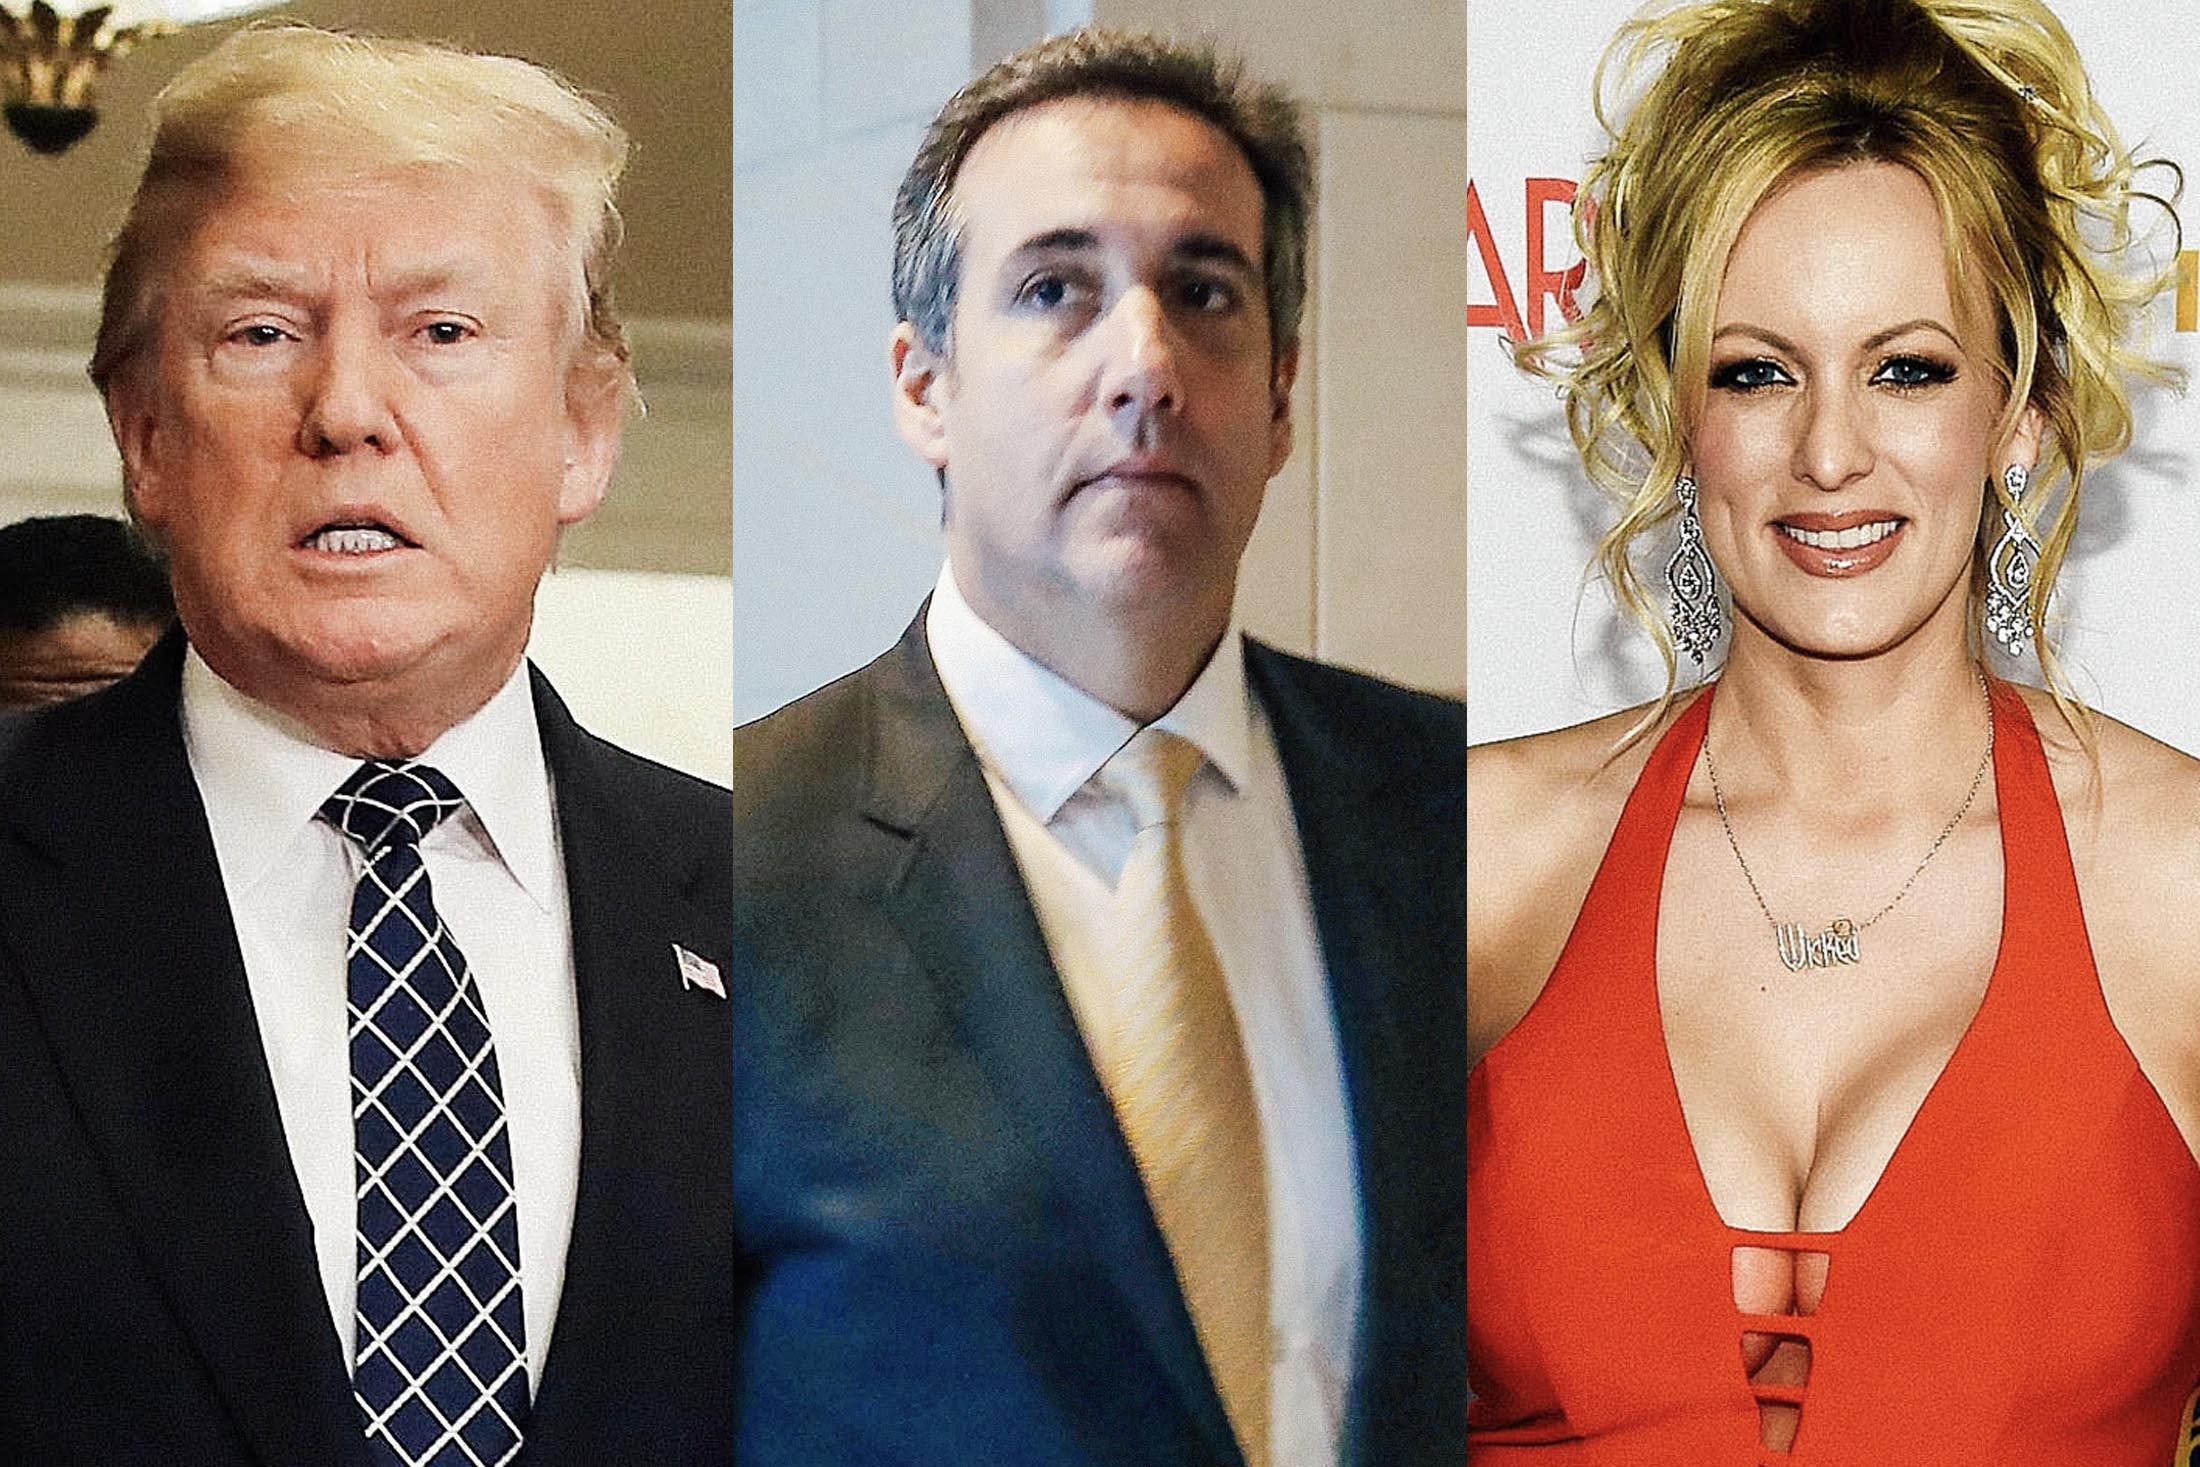 2200px x 1467px - Trump lawyer paid $130K for pornographic actress NDA: Report.